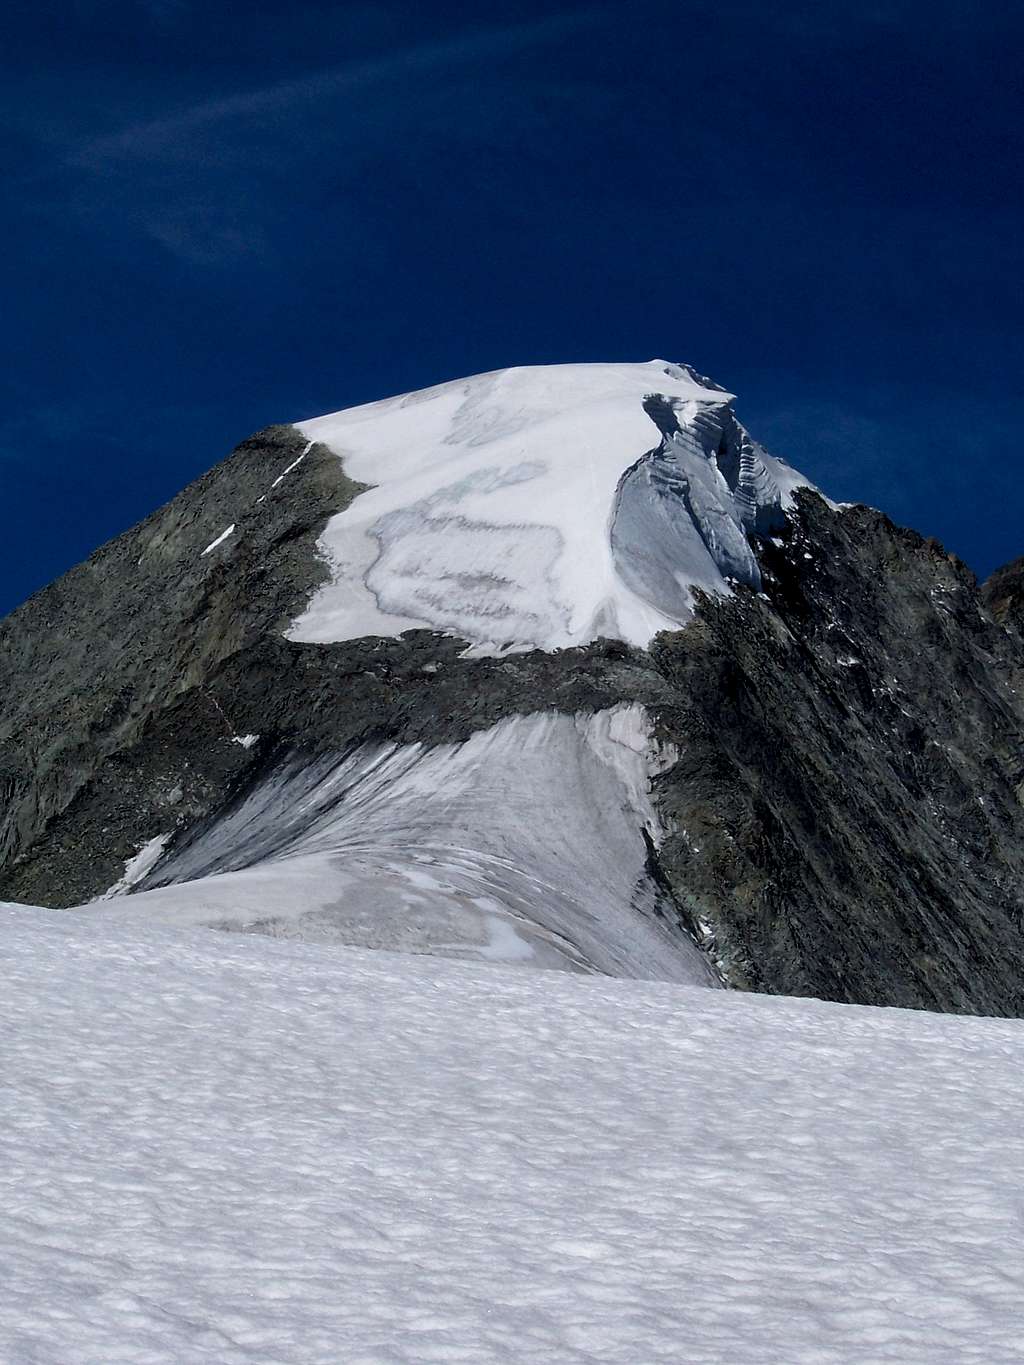 East ridge in bad conditions (28 july 2005)